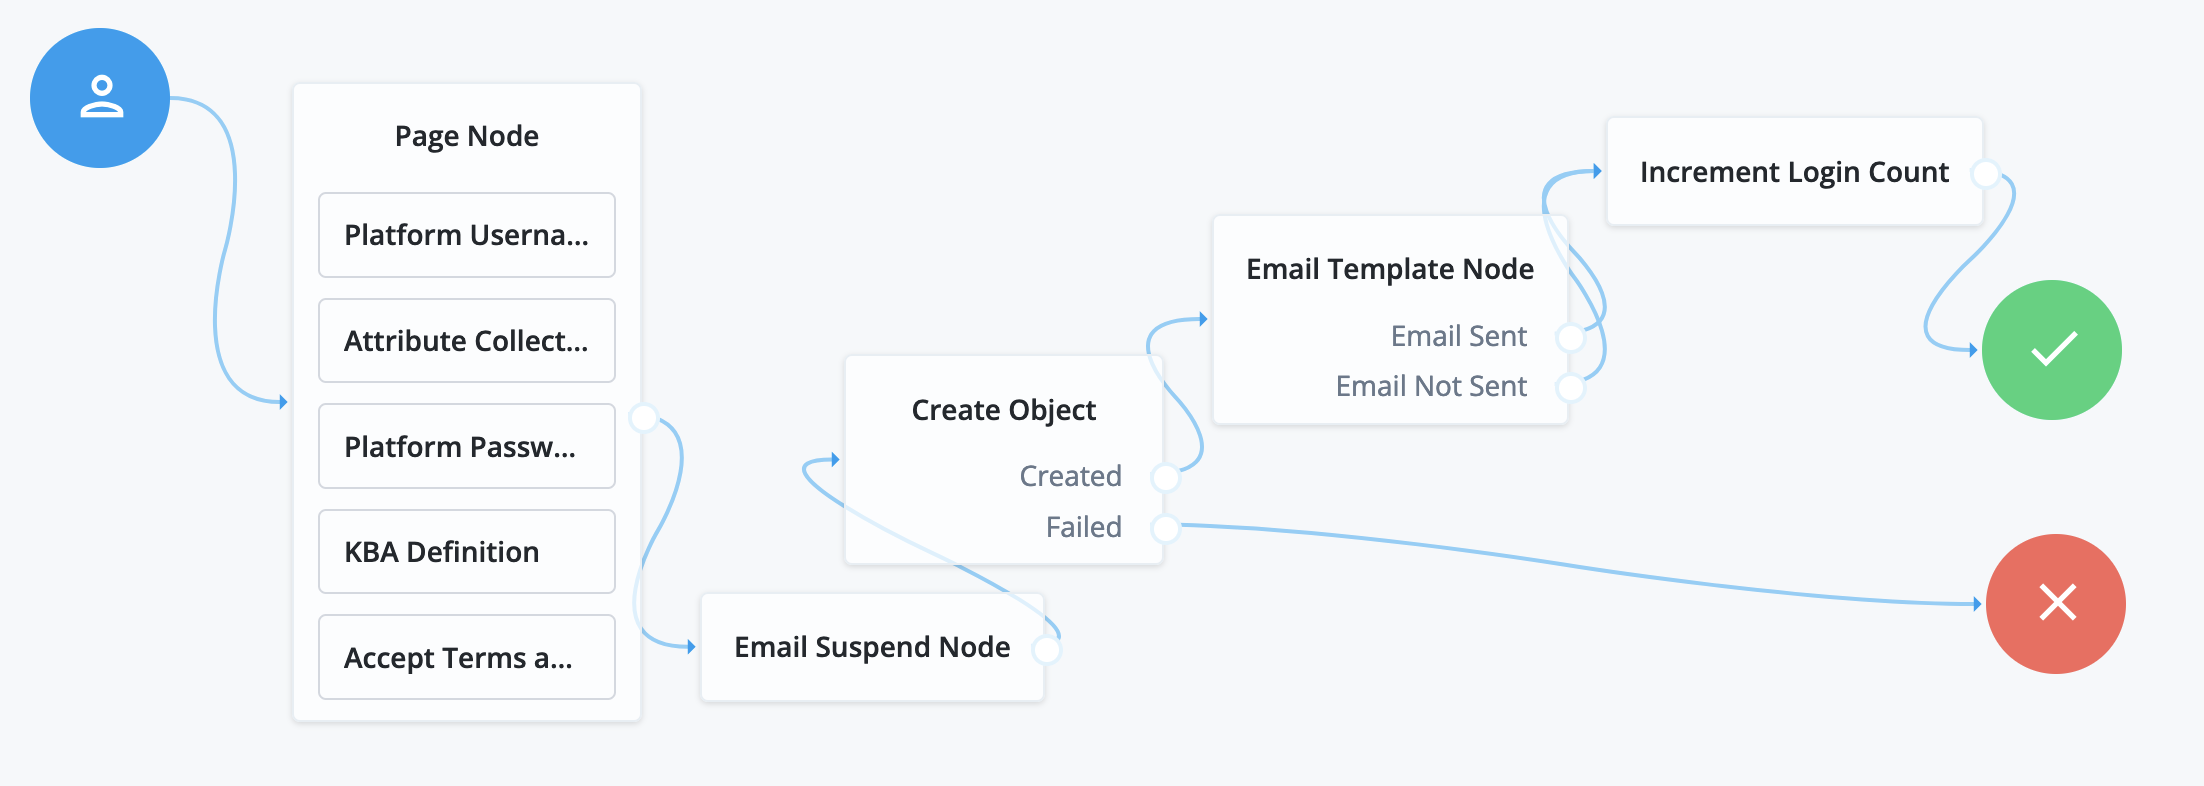 Registration journey with an [.label]#Email Template# node